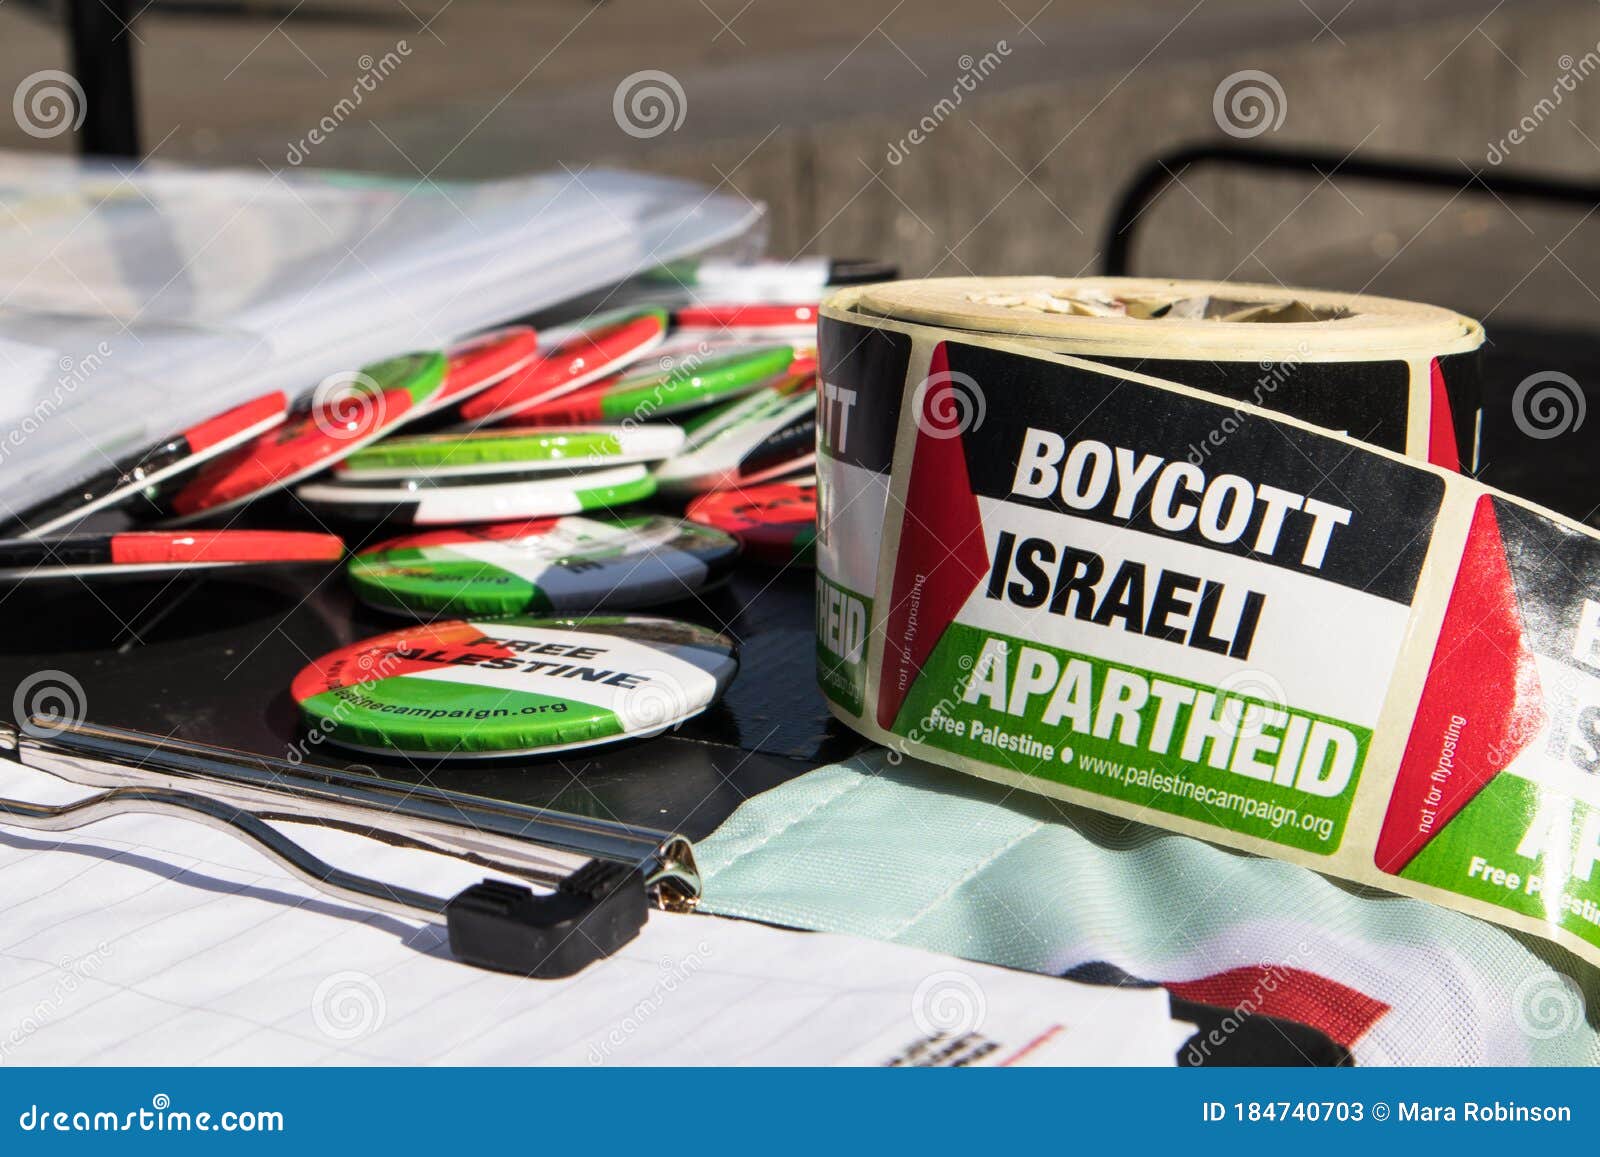 Collection of stickers about Palestine. Solidarity for Palestine